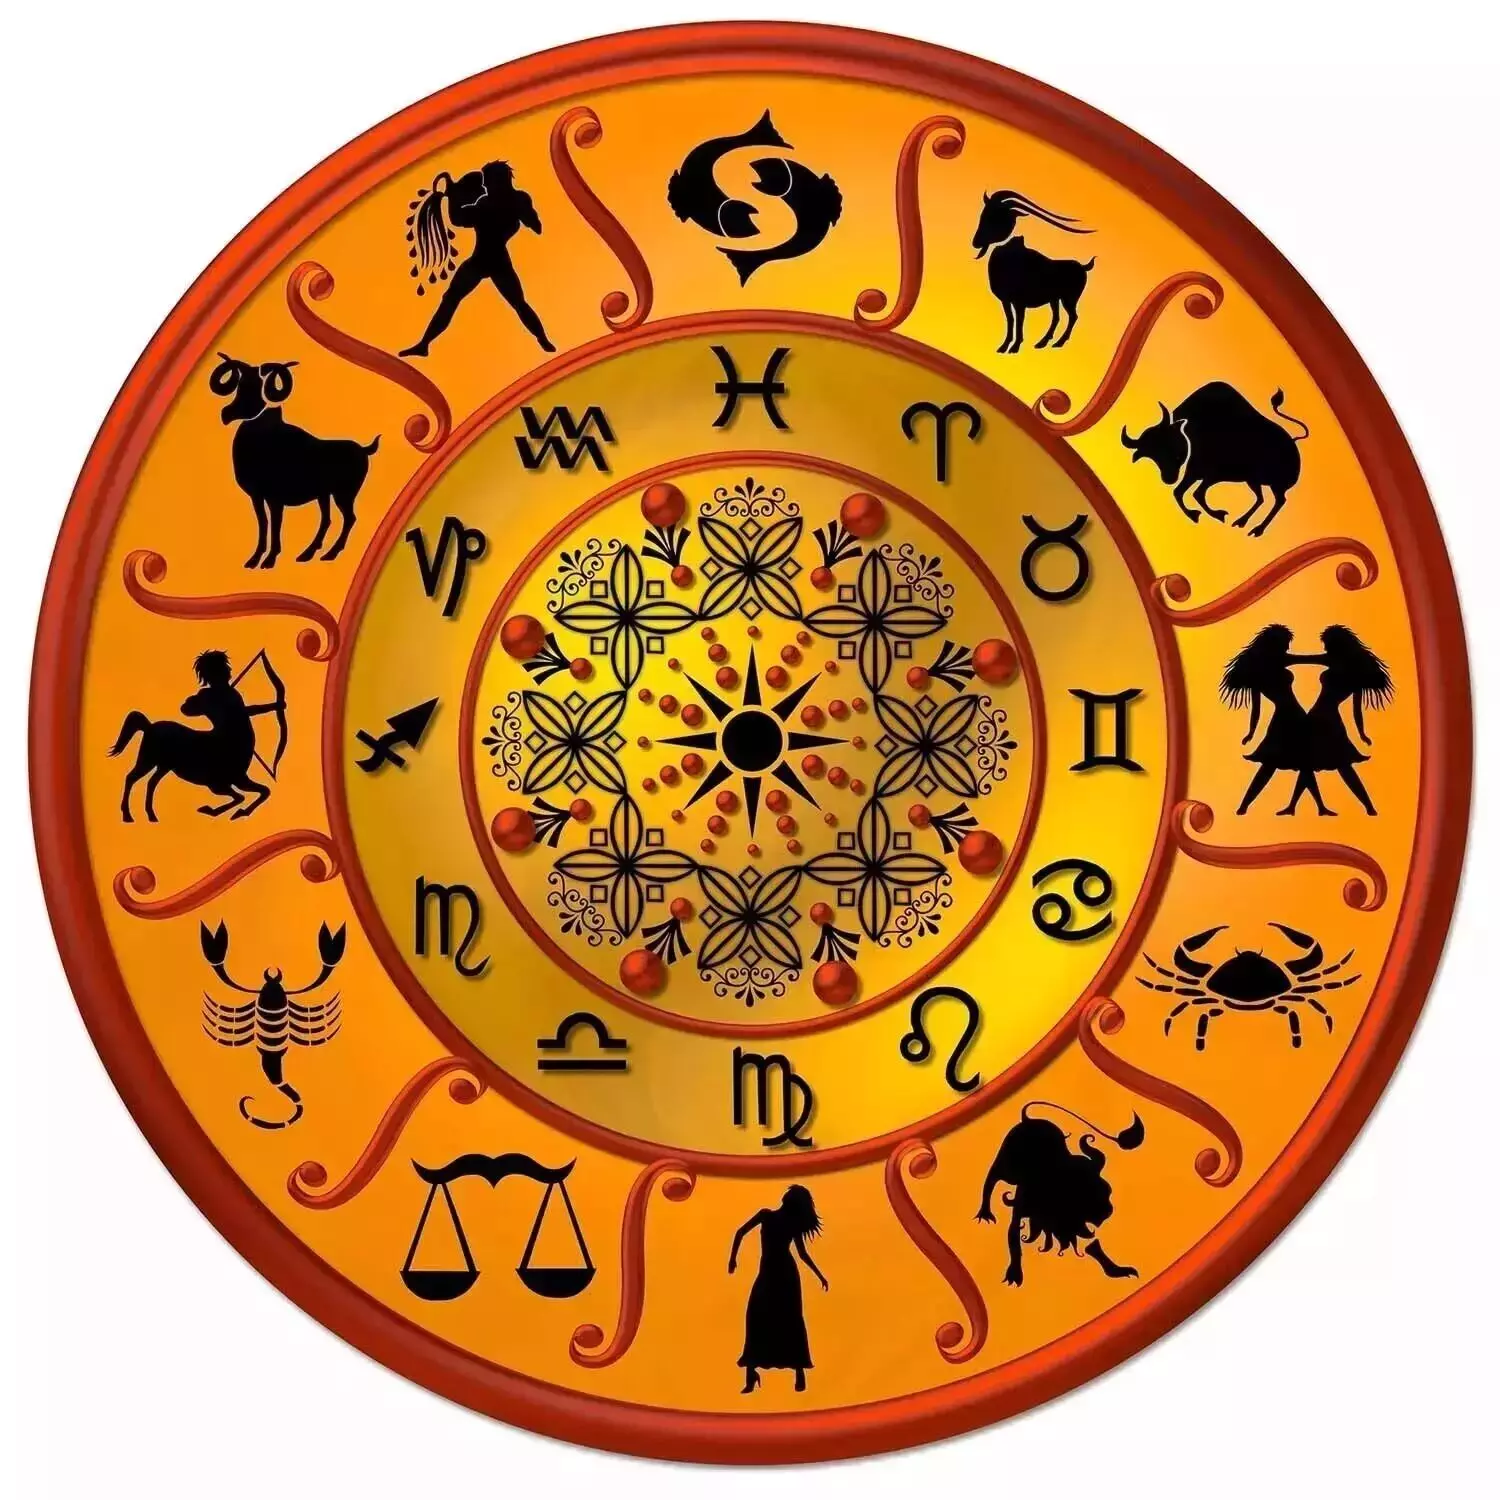 24 February  – Know your todays horoscope